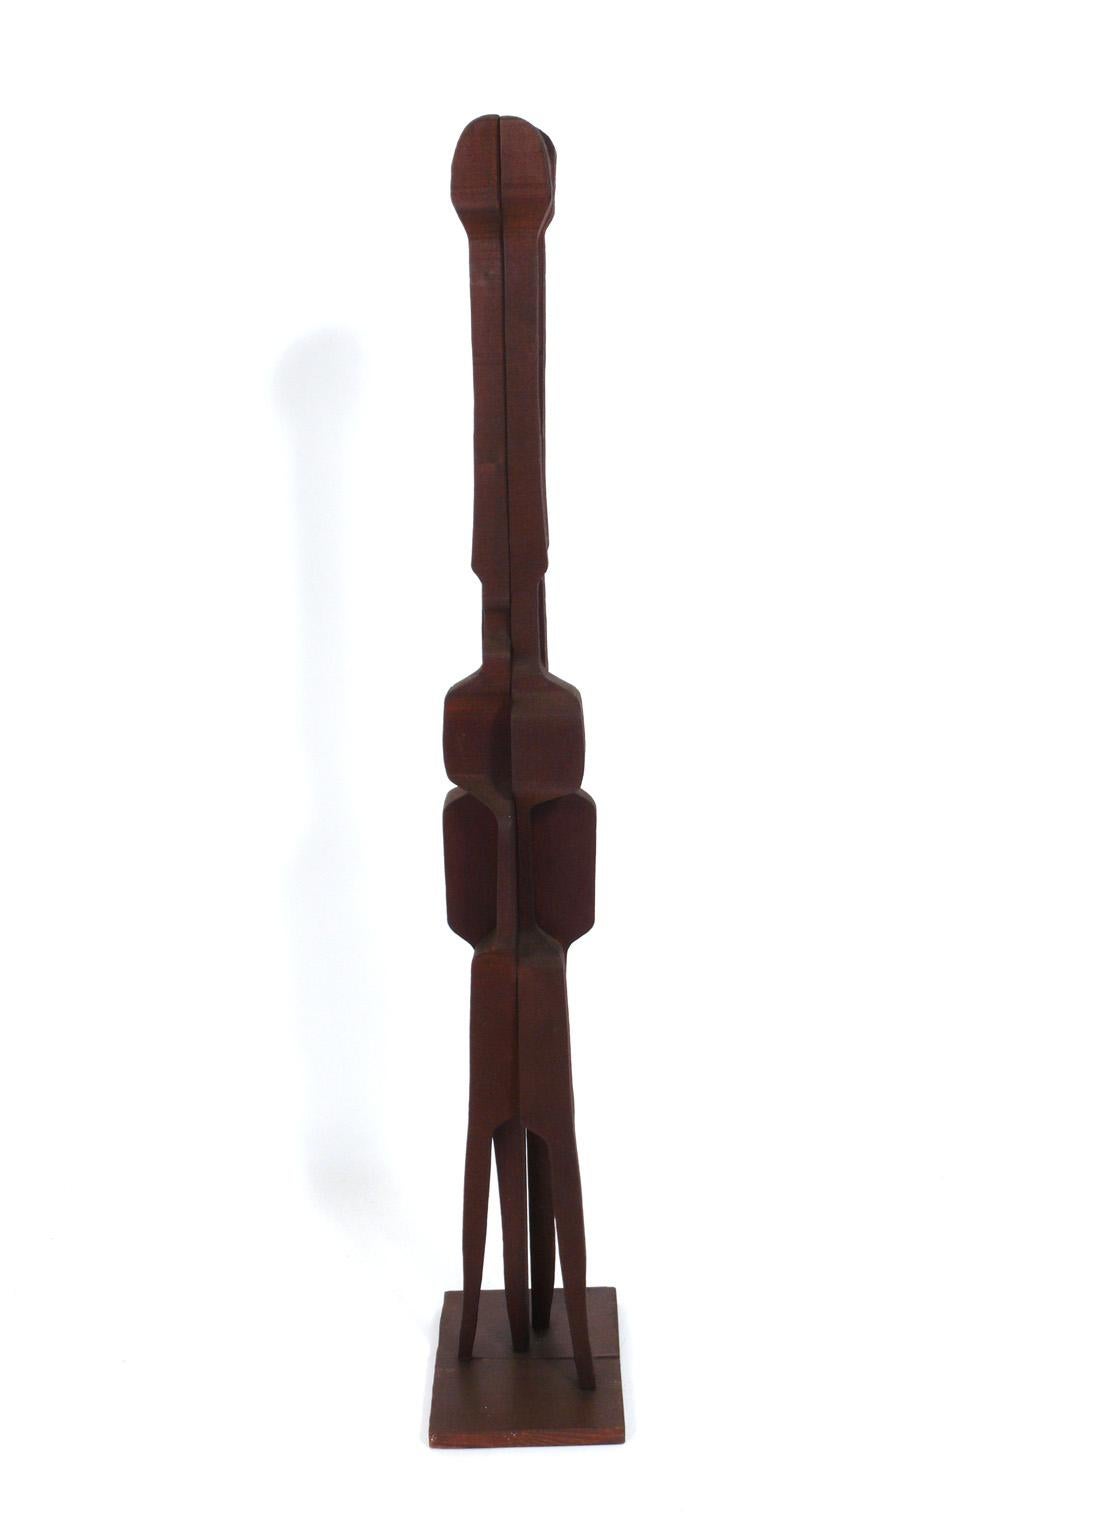 Tall abstract wood sculpture, artist unknown, probably American, circa 1950s. It stands an impressive 49